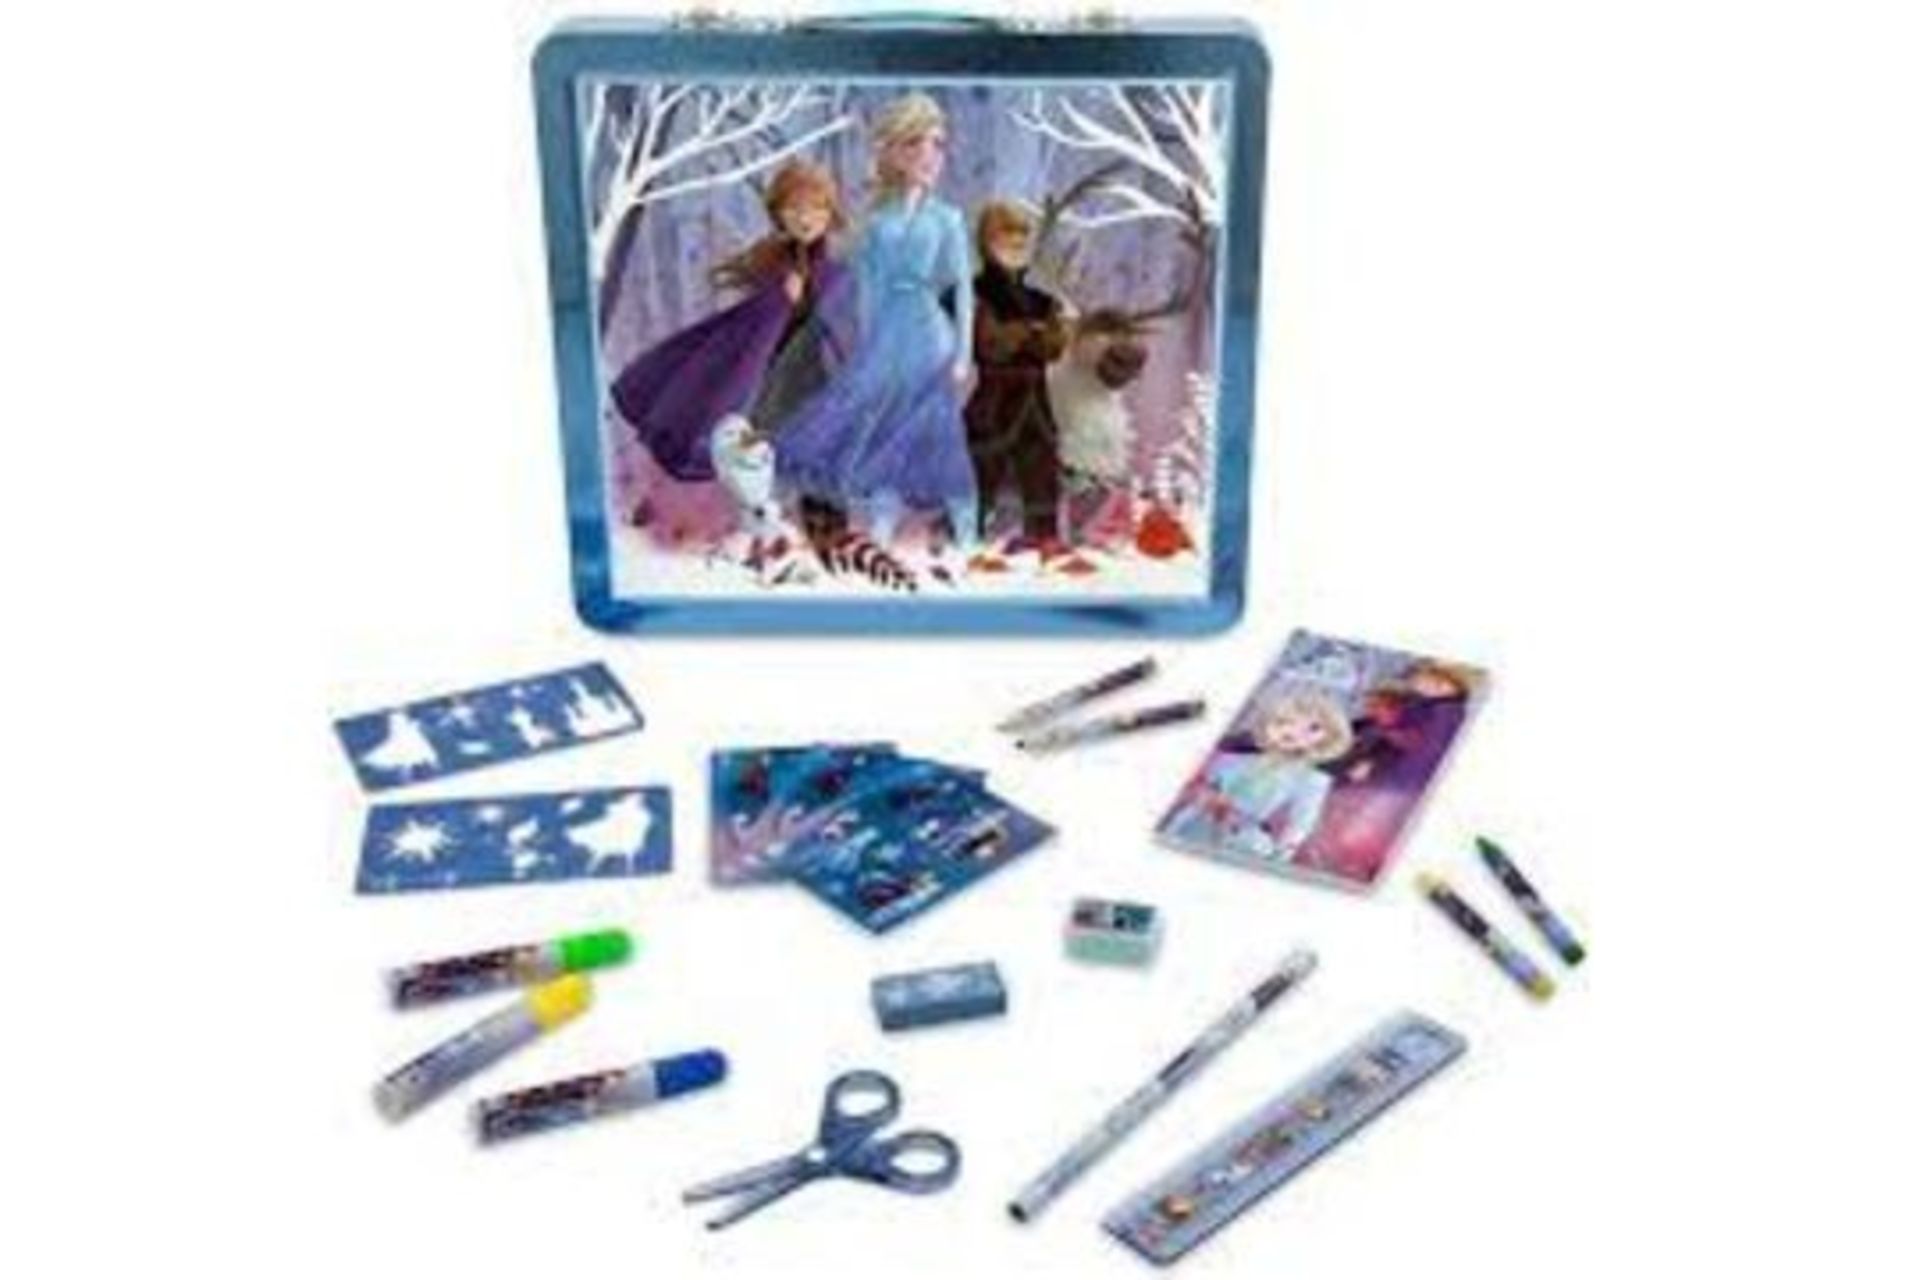 TRADE LOT 60 X Disney Frozen Tin Art Case. (PICK FROM P/W) Excellent for budding artists, this